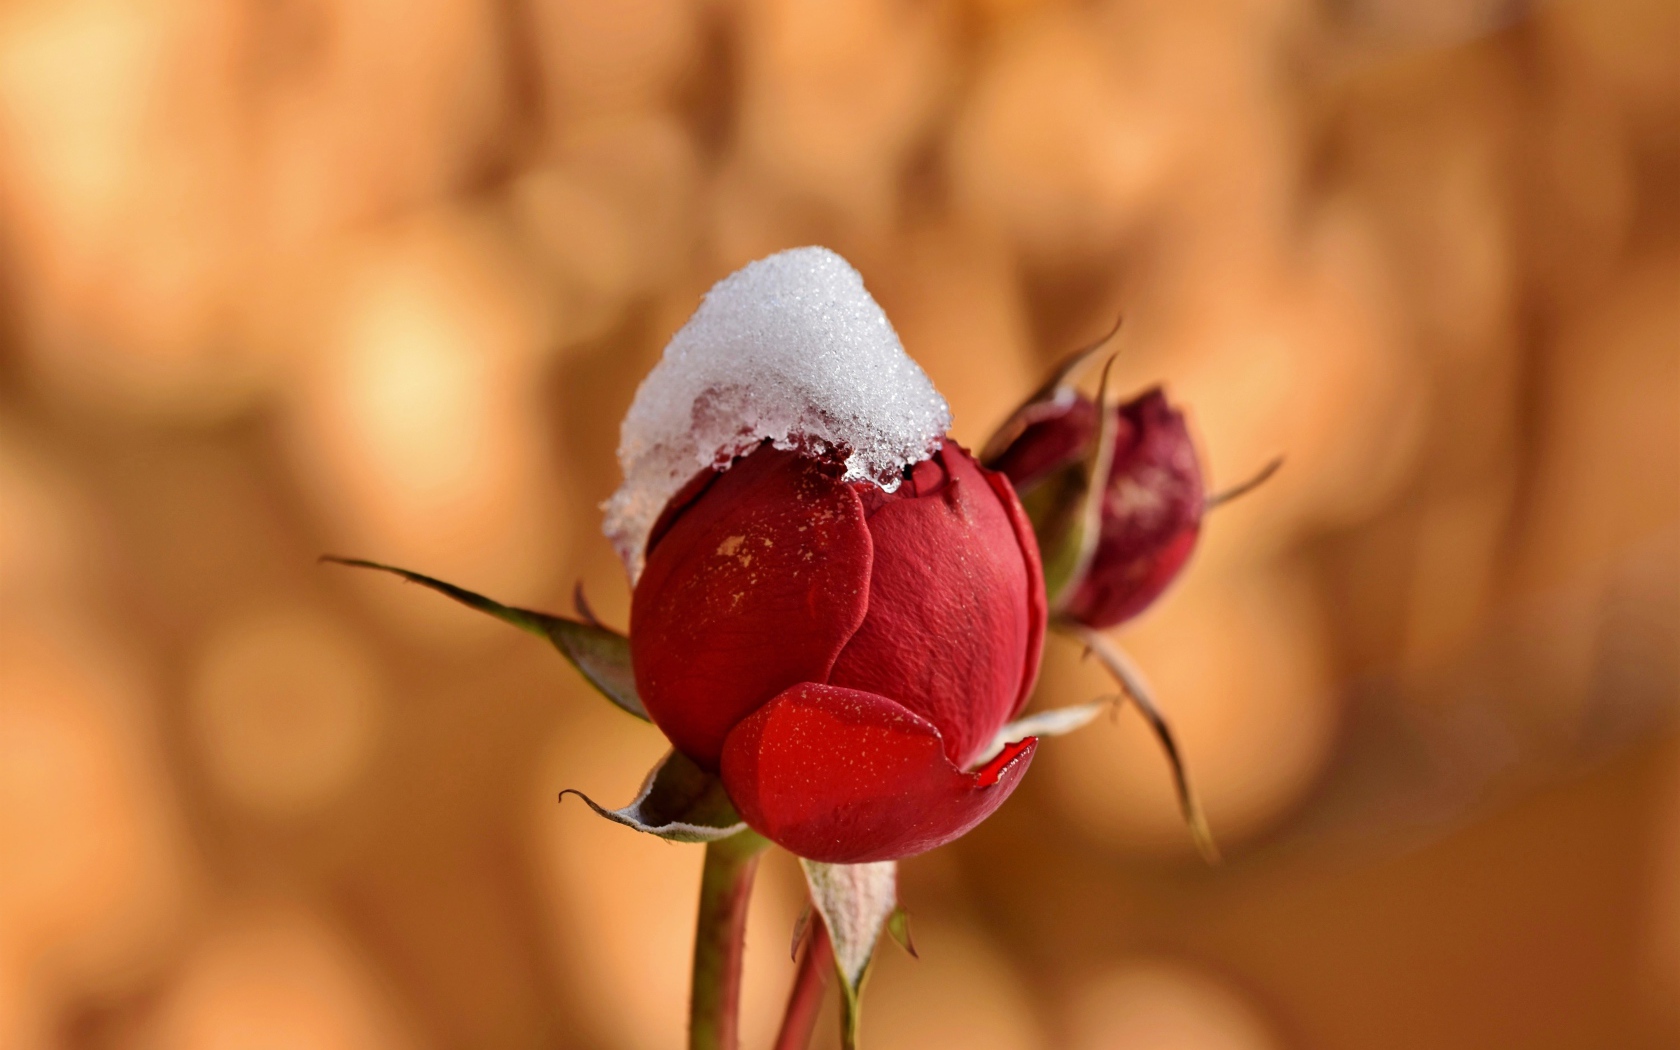 Rosebud in the snow close up